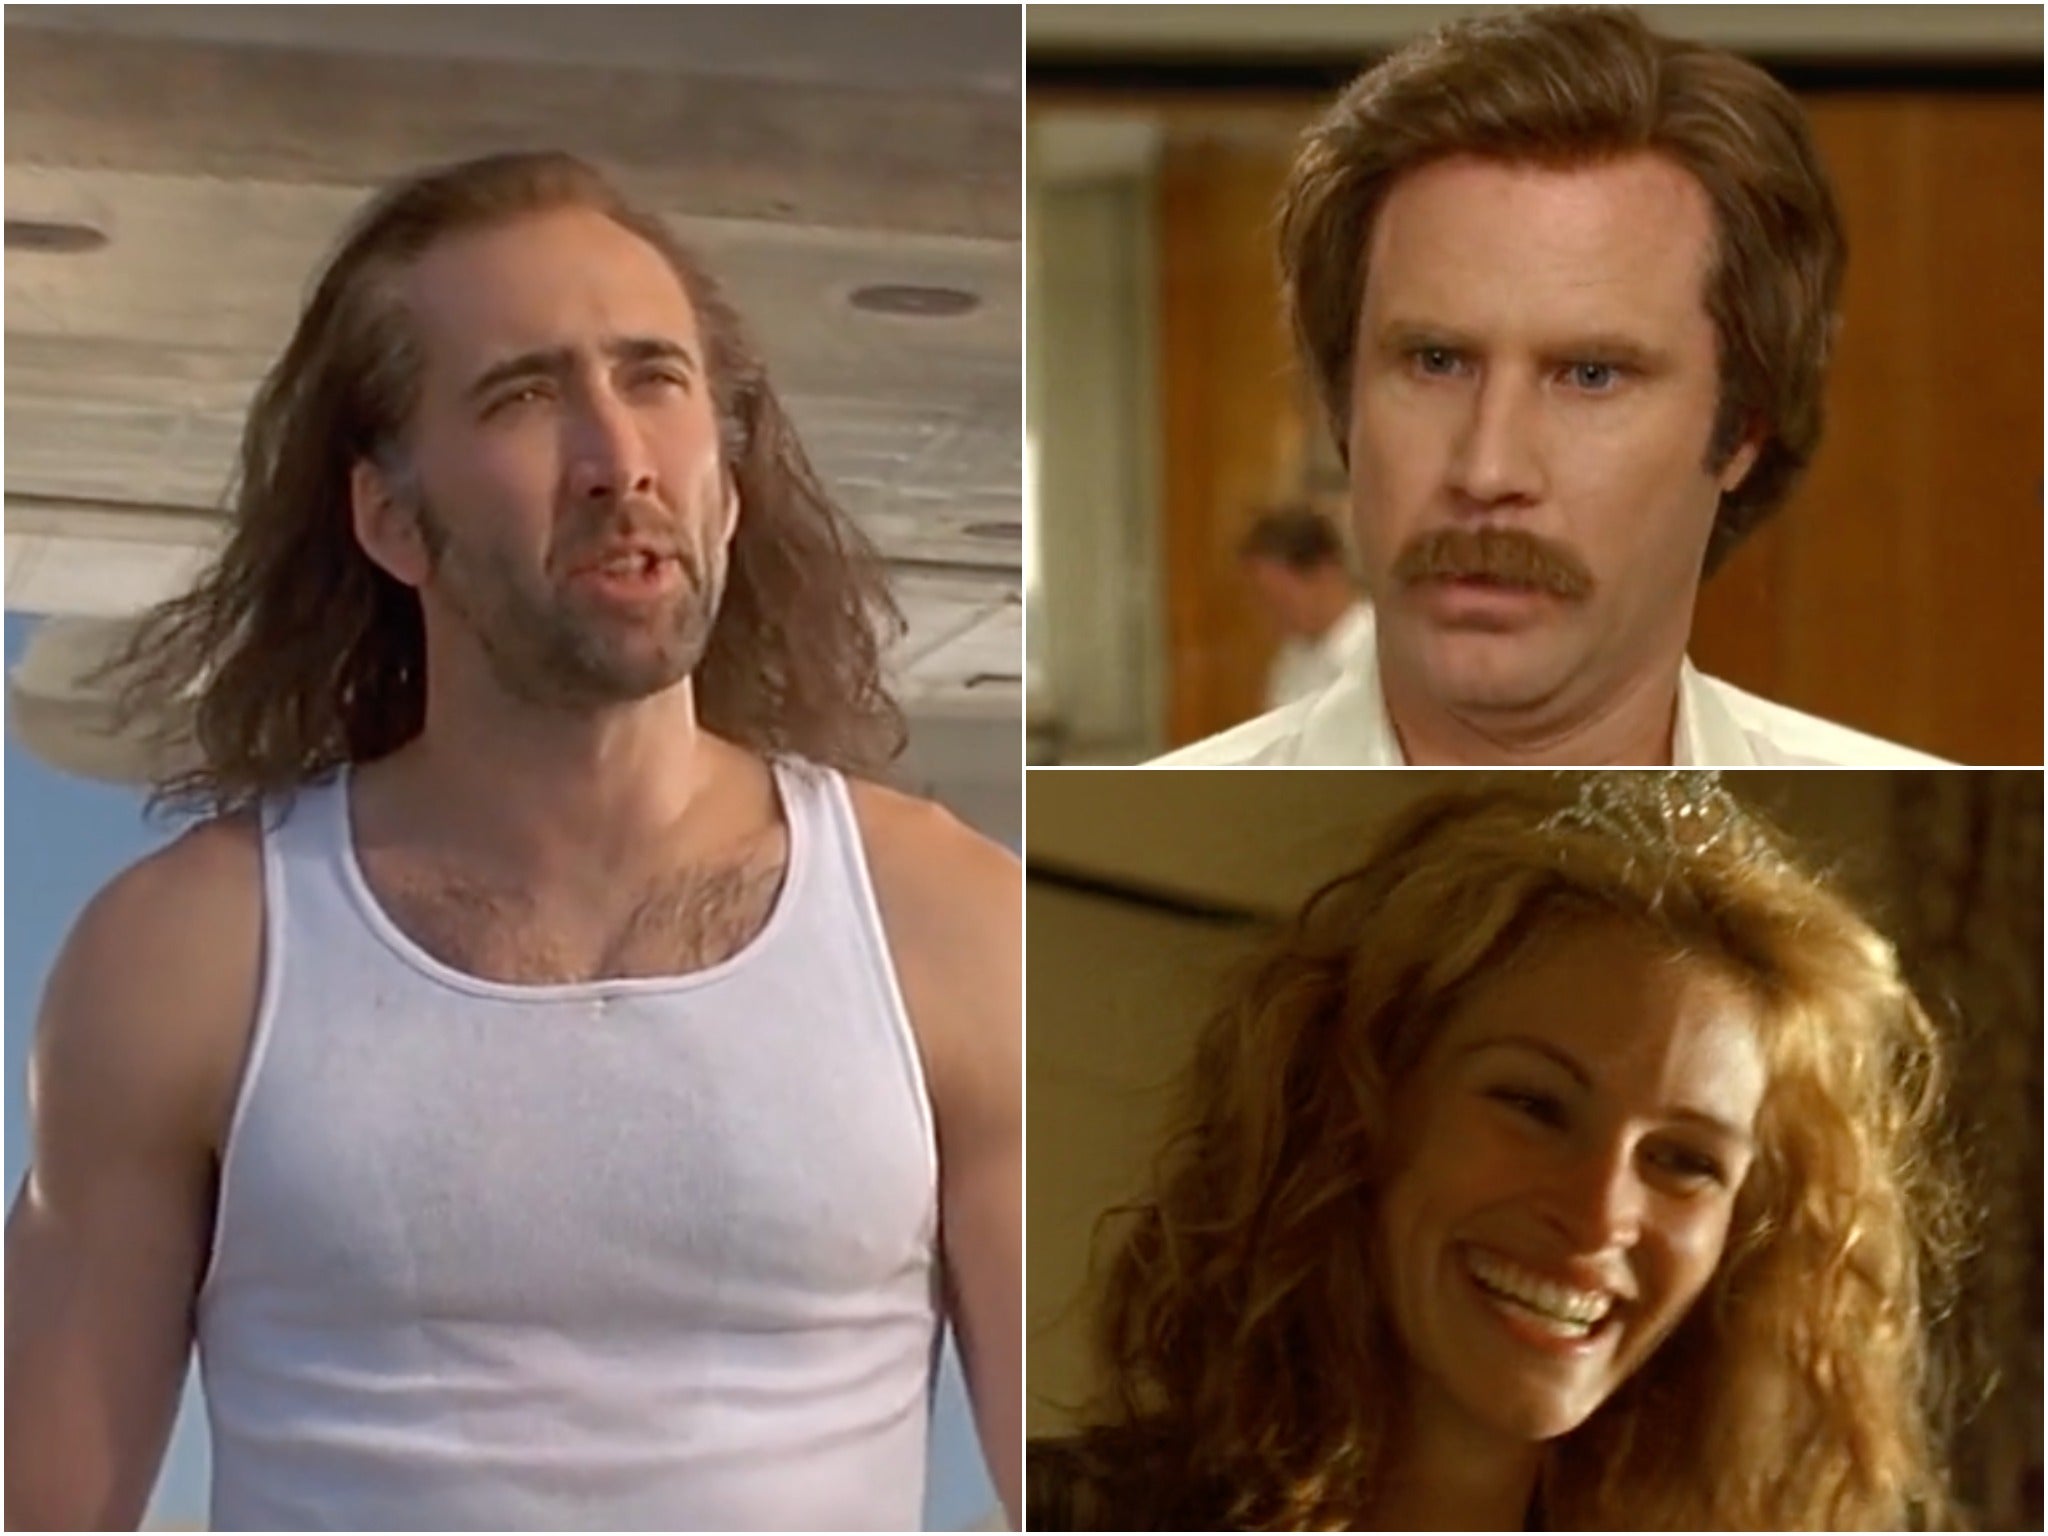 Nothing was too insane': is Con Air the strangest action film ever